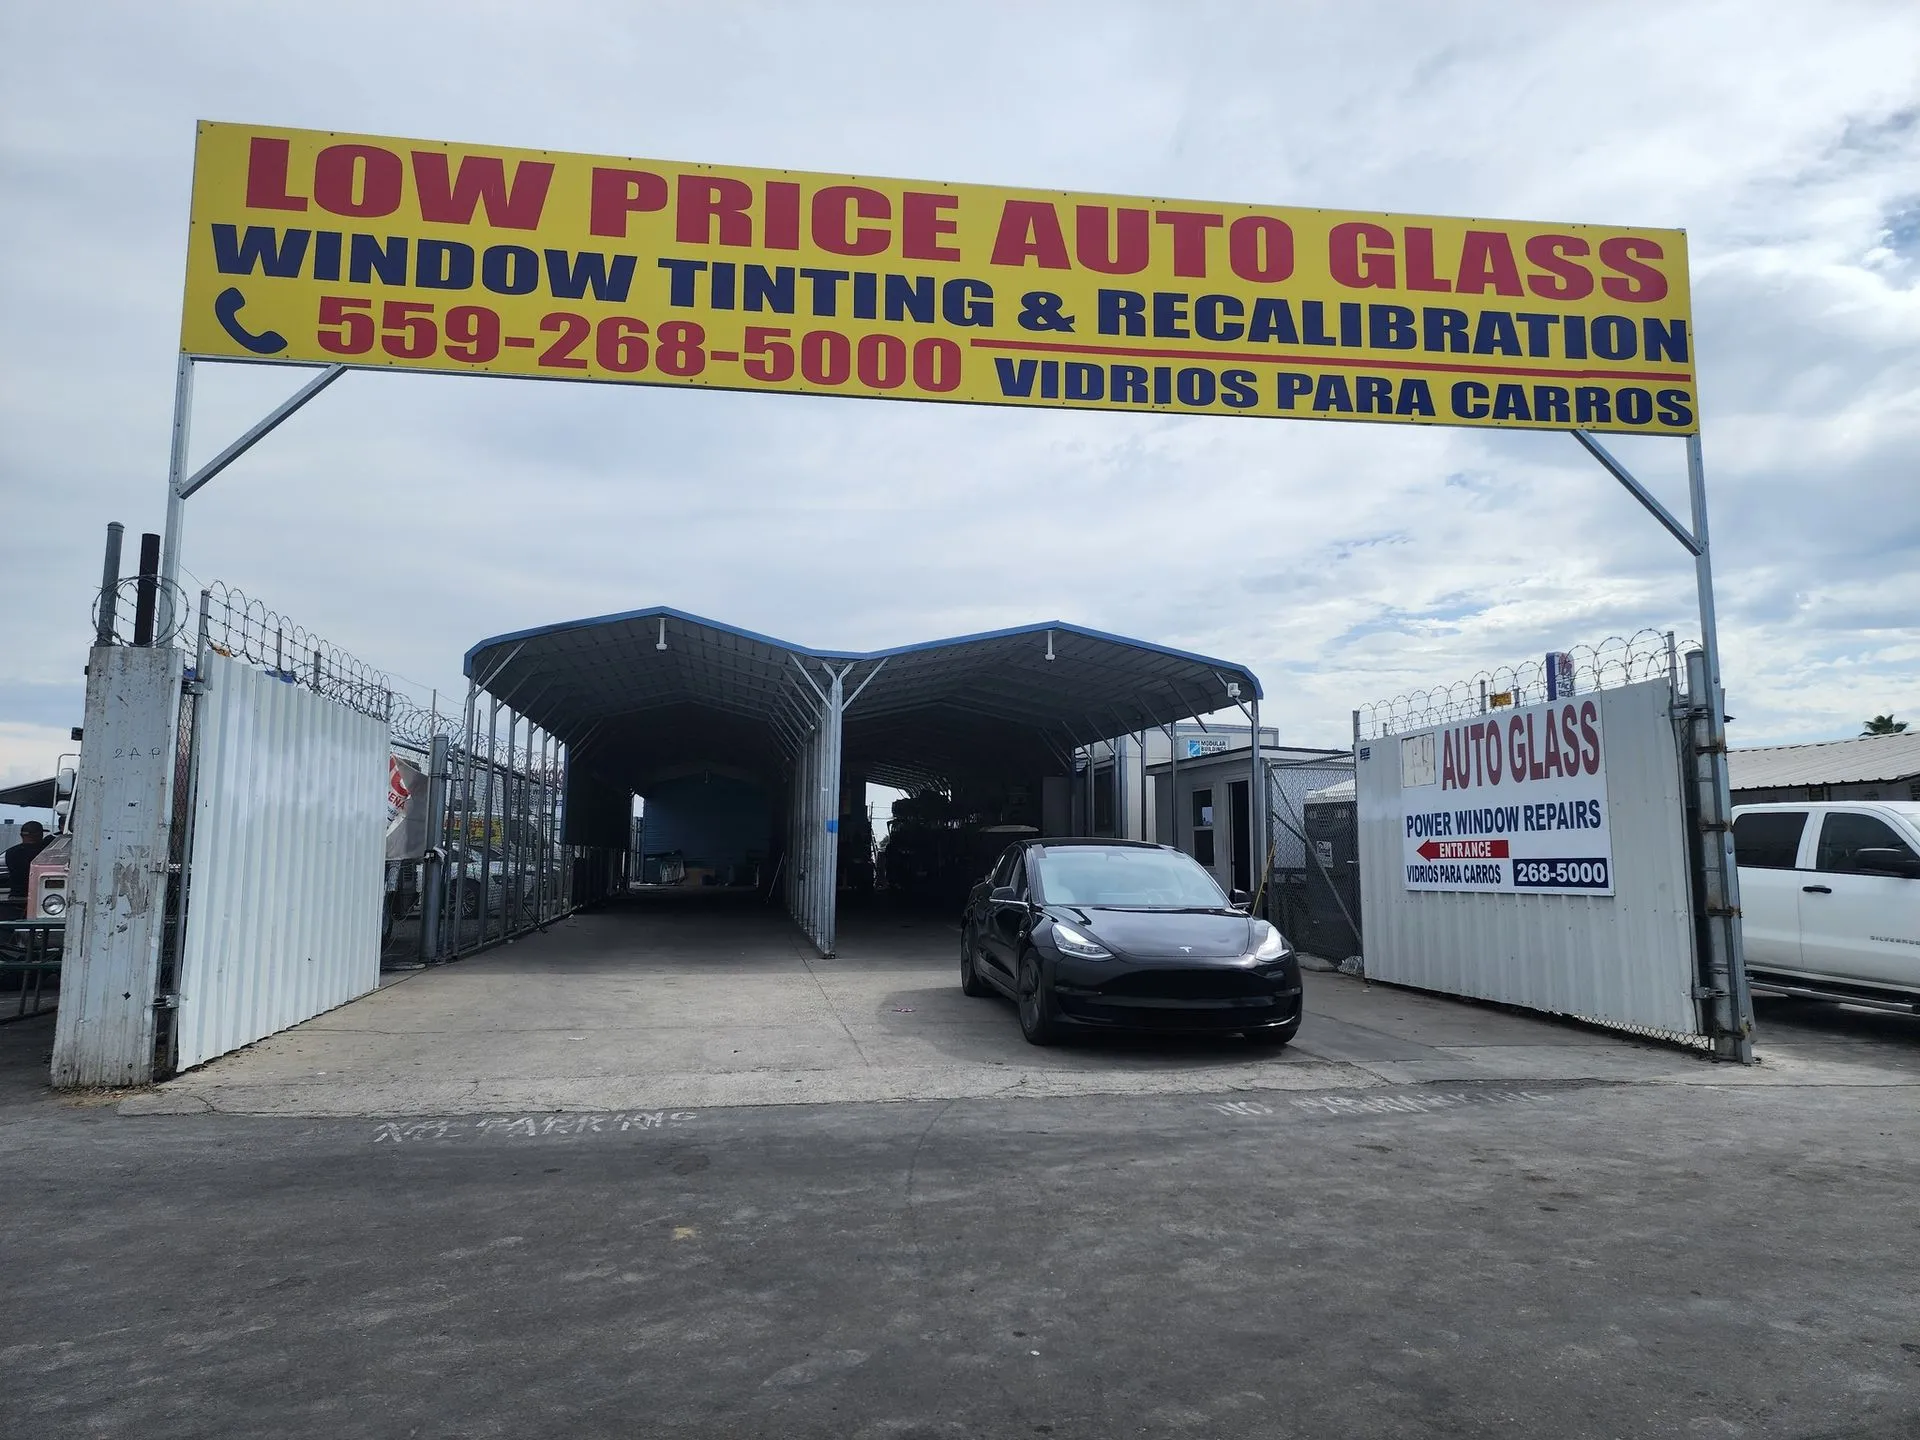 Low Price Auto Glass Repair & Replacement Services in Fresno, CA